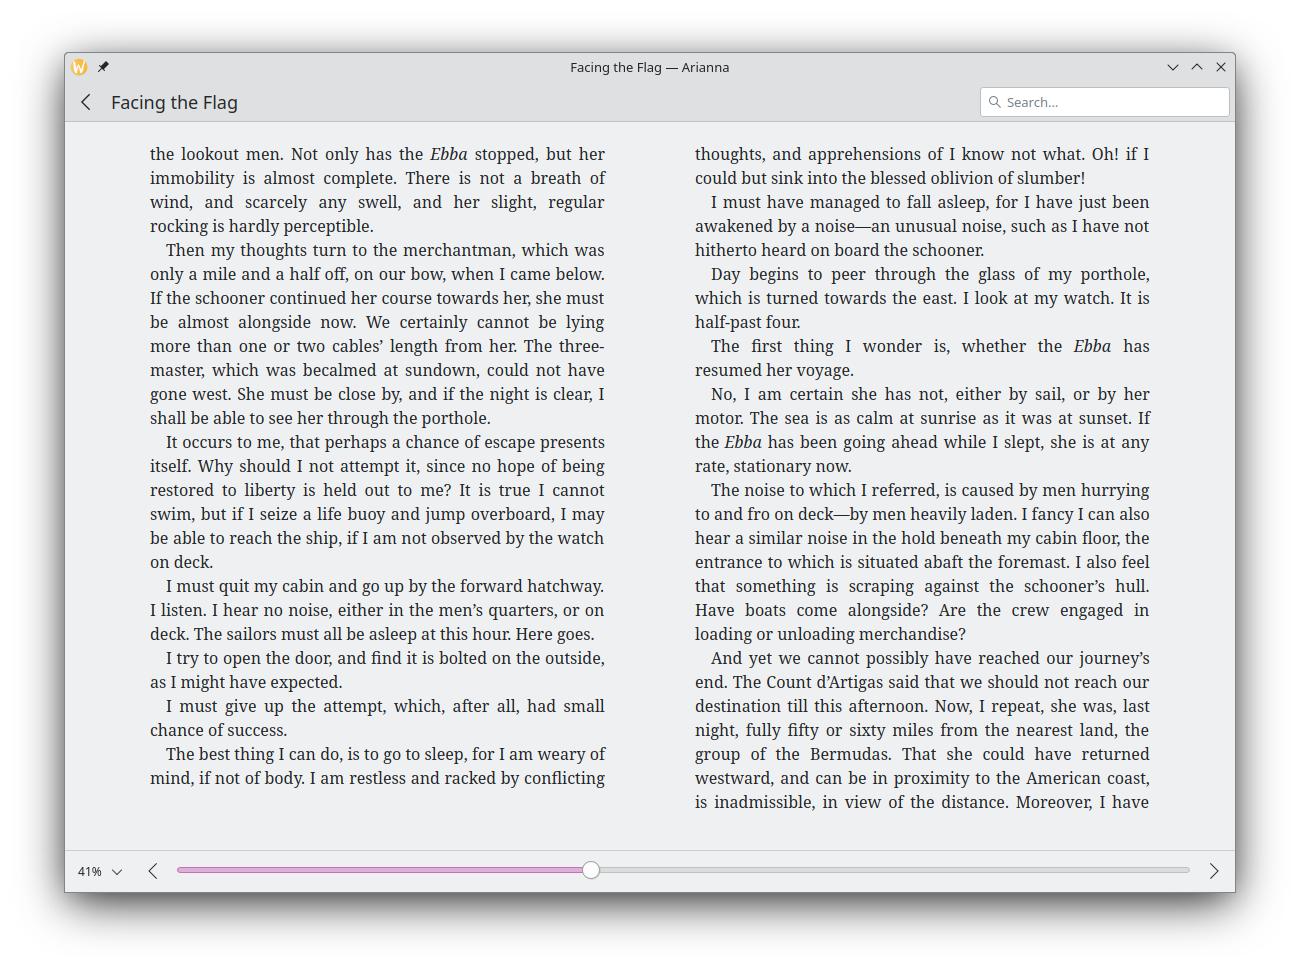 Ebook reader showing the book content